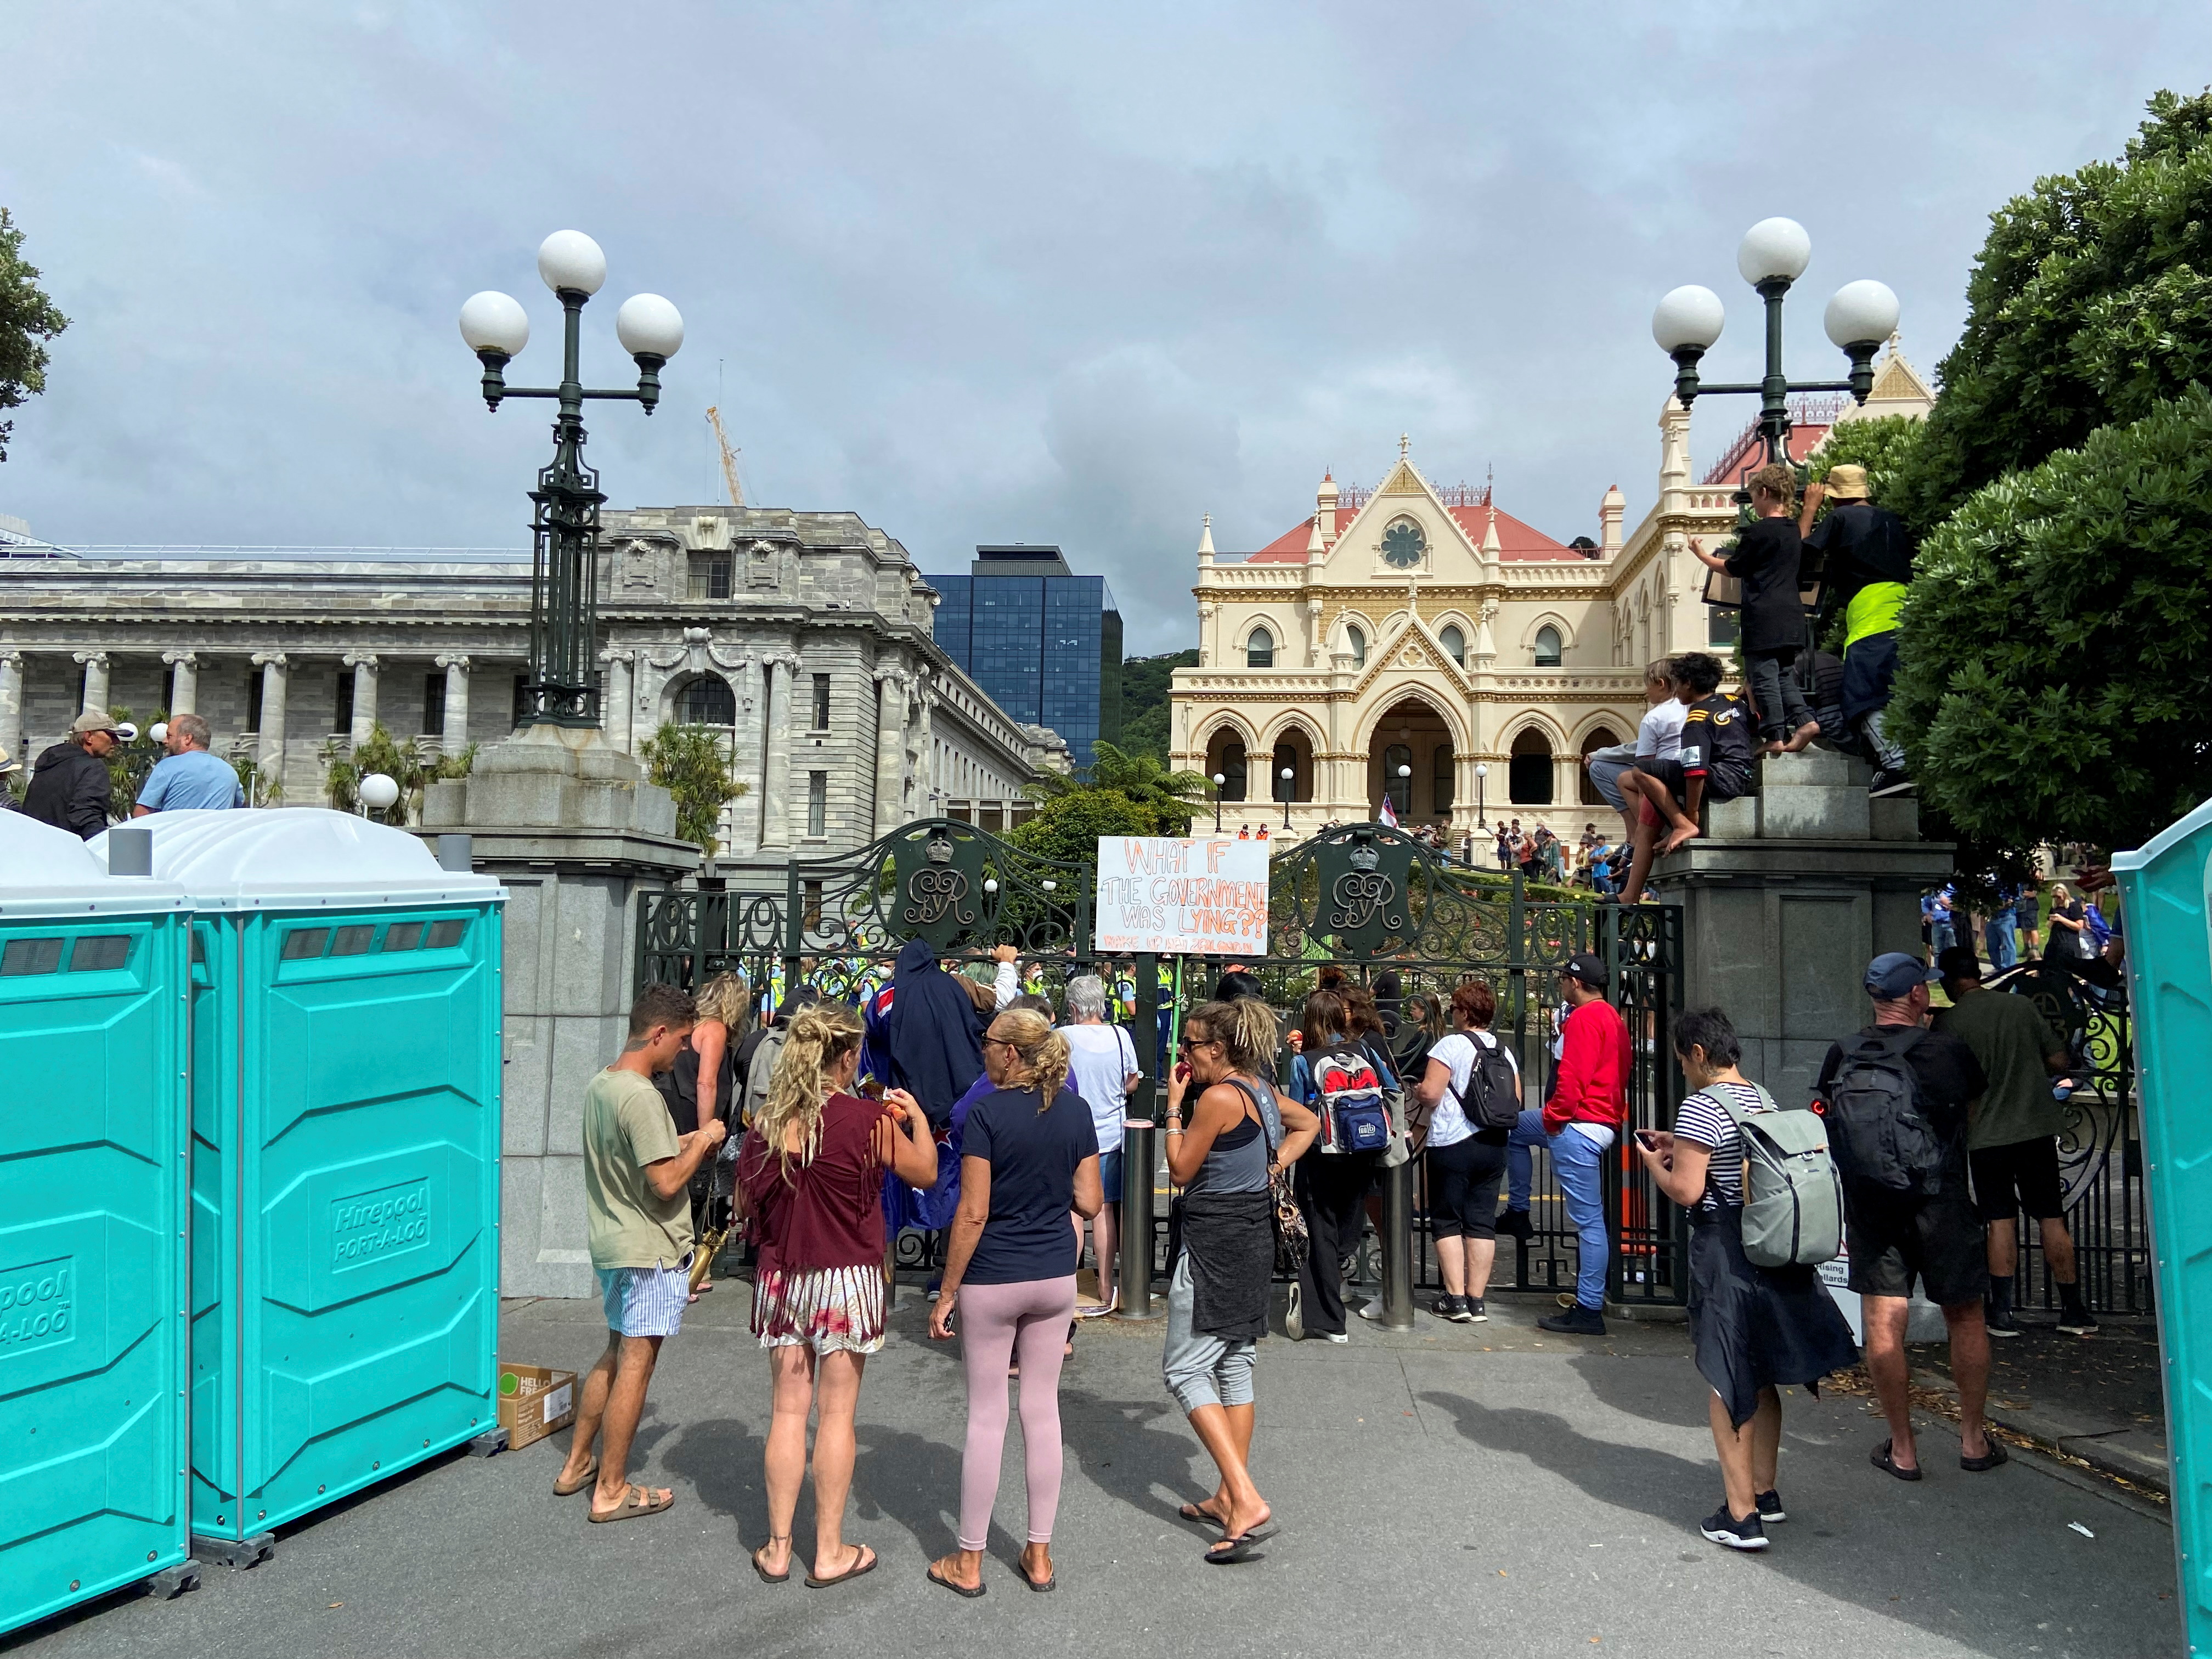 Anti-vaccine mandate protesters gather to demonstrate in front of the parliament, in Wellington